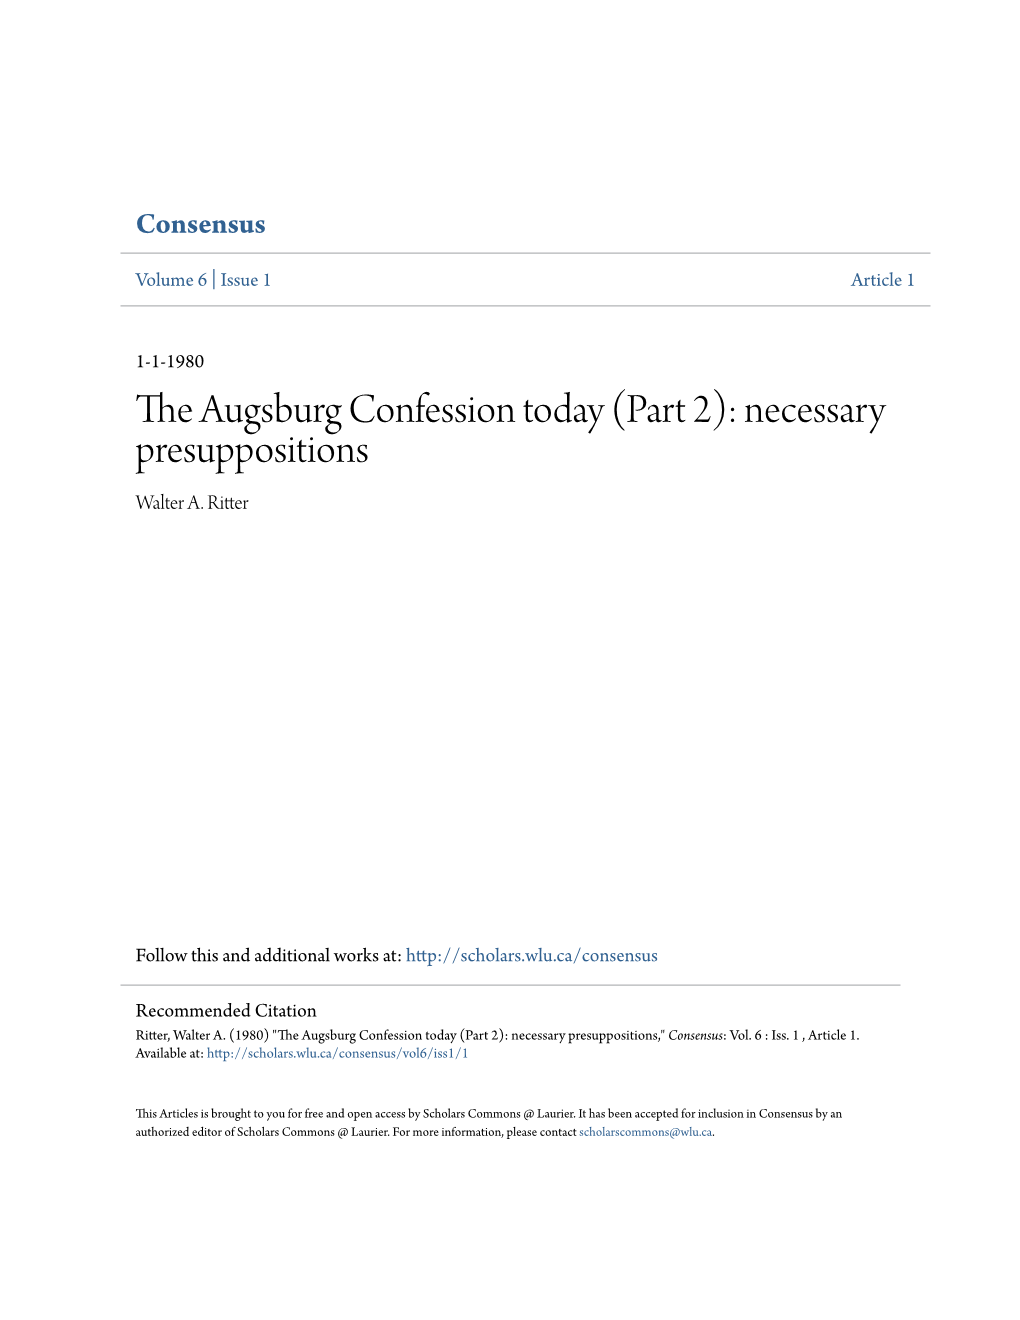 The Augsburg Confession Today (Part 2): Necessary Presuppositions Walter A